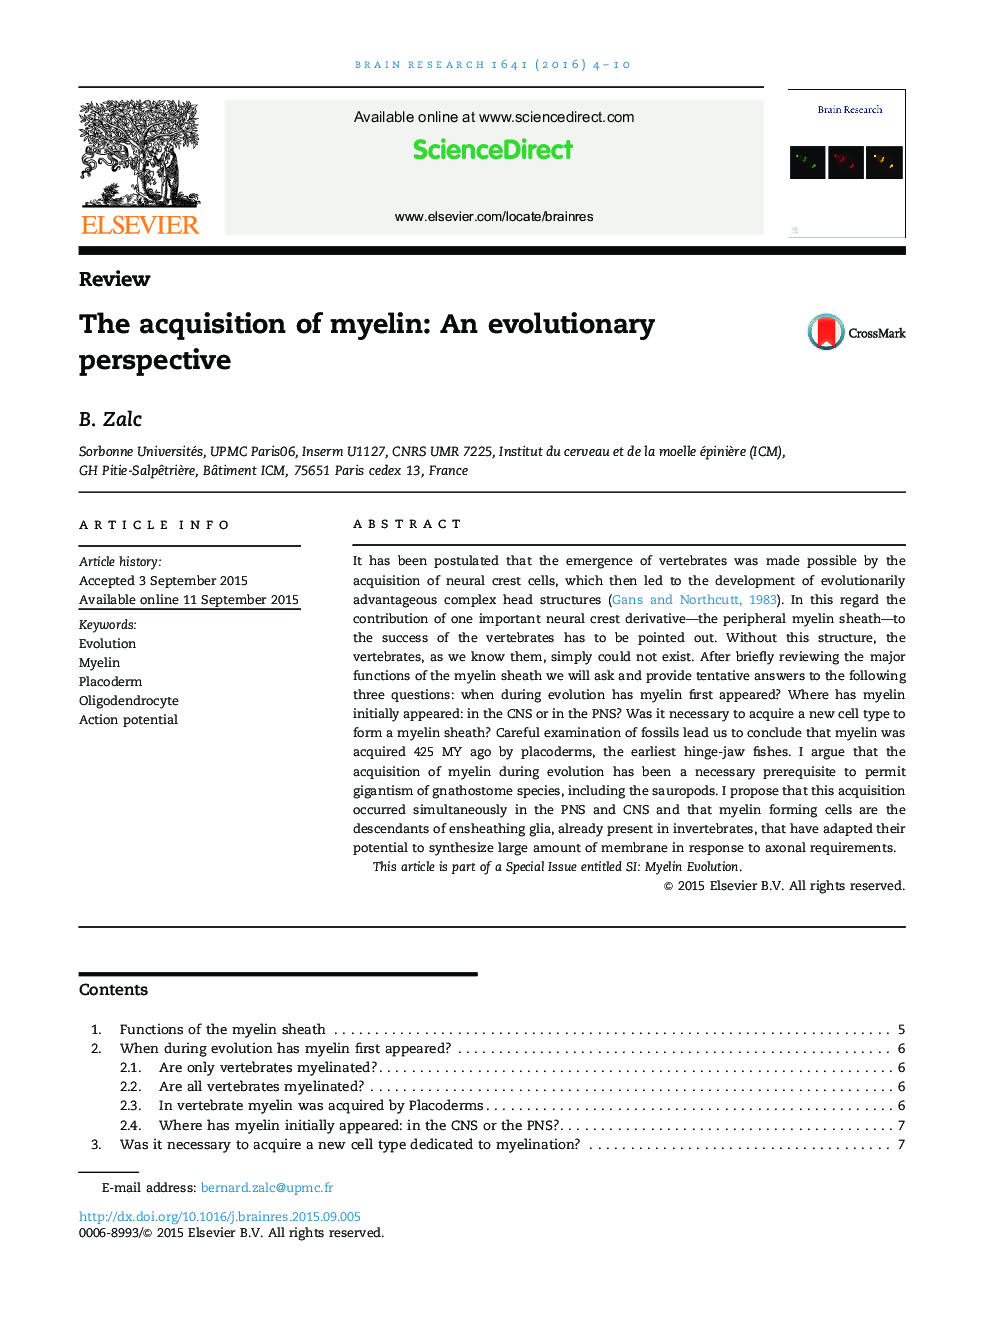 ReviewThe acquisition of myelin: An evolutionary perspective